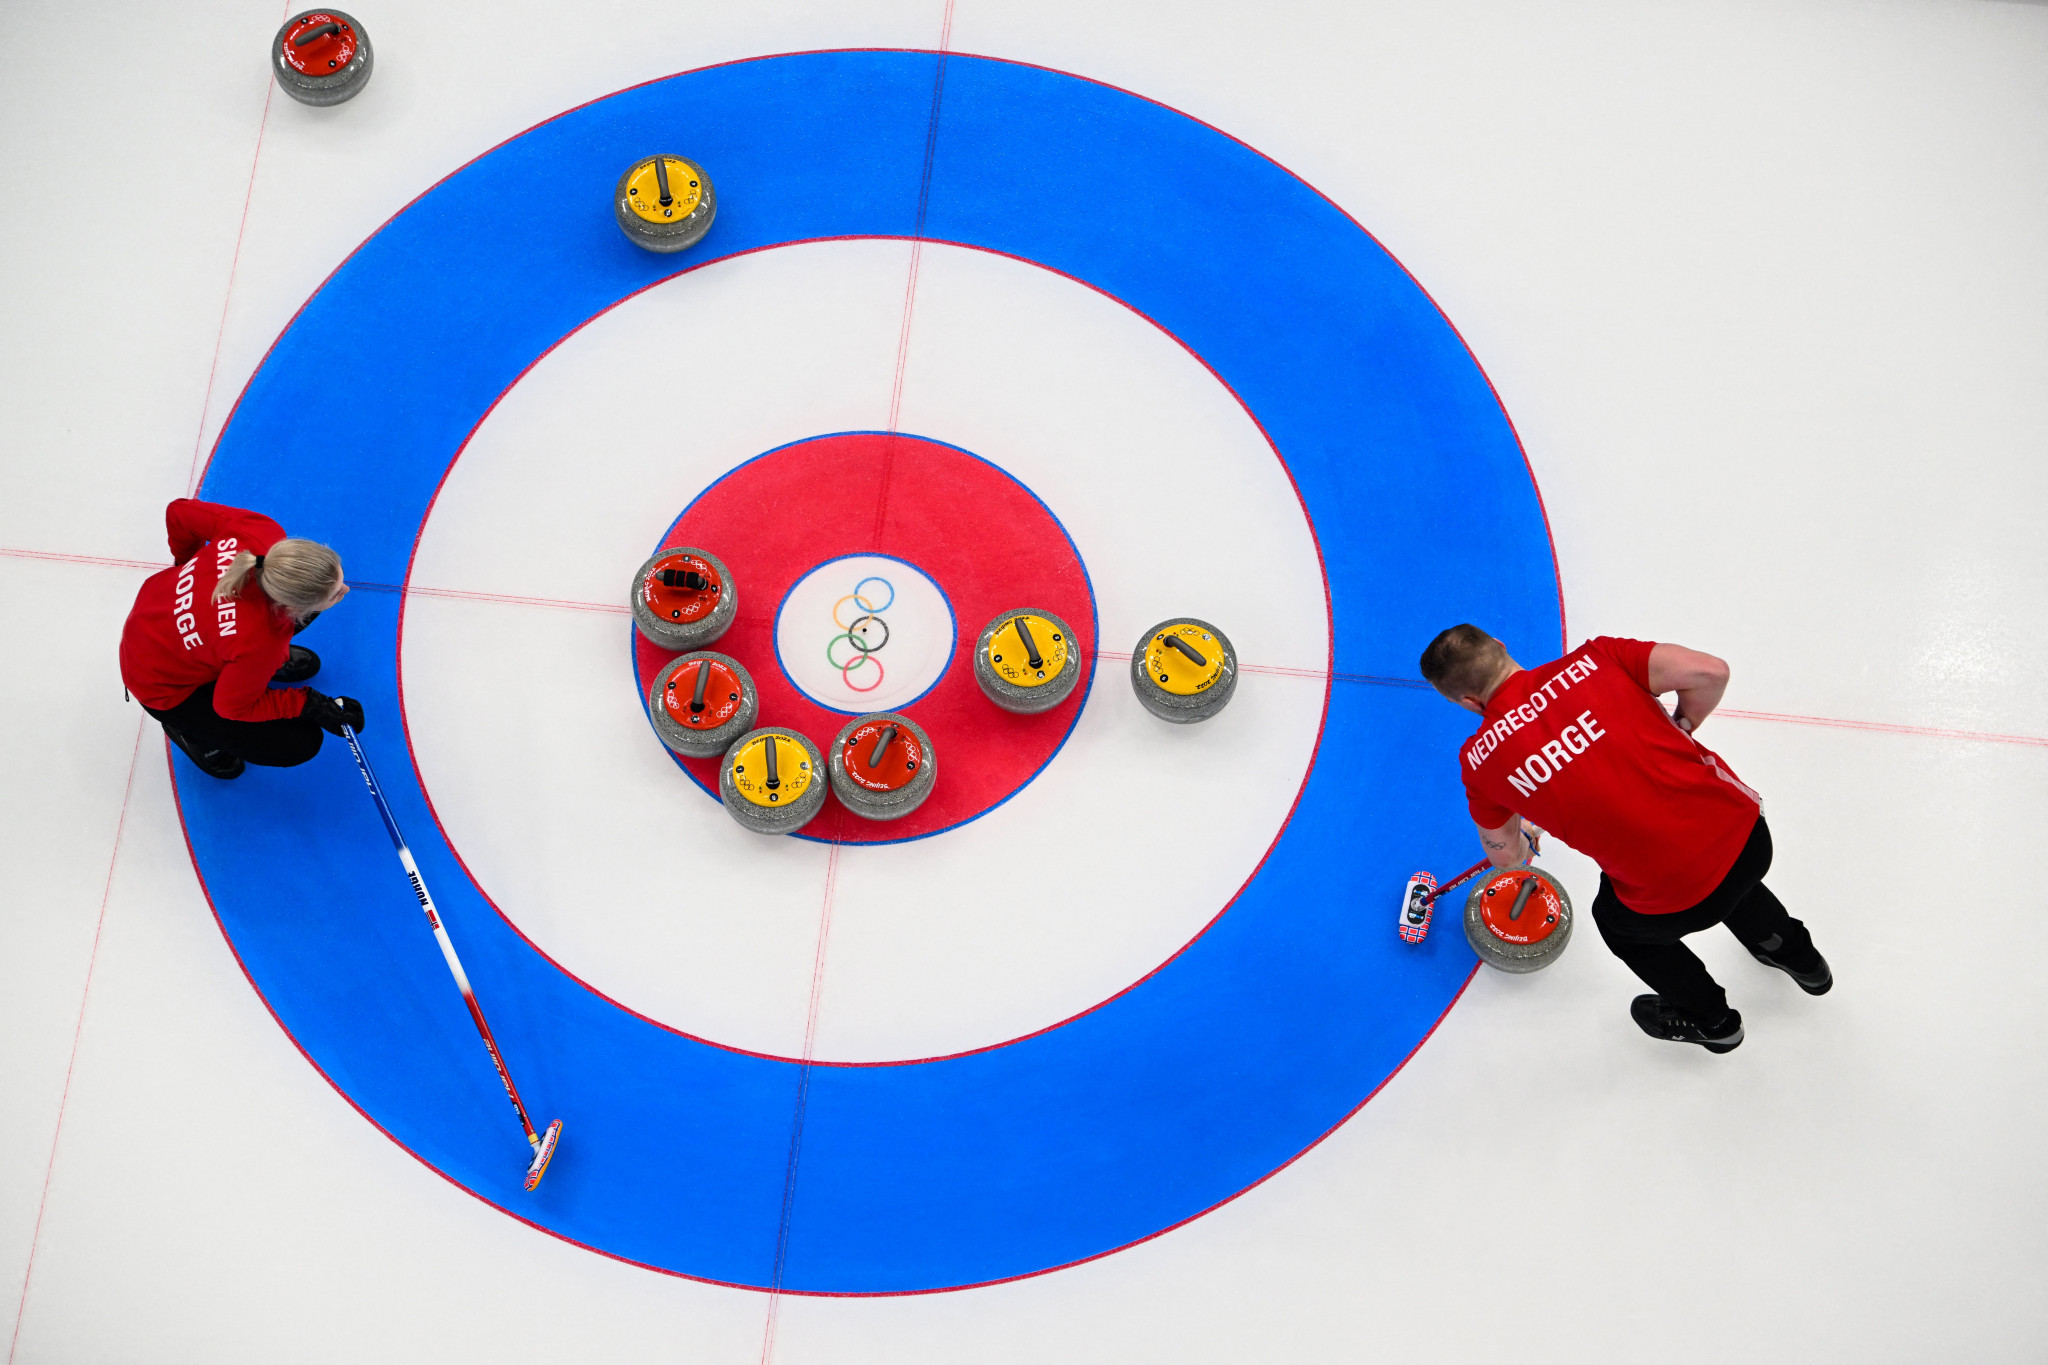 Norway overcame Britain in the mixed doubles curling tournament to set up a final versus Italy ©Getty Images